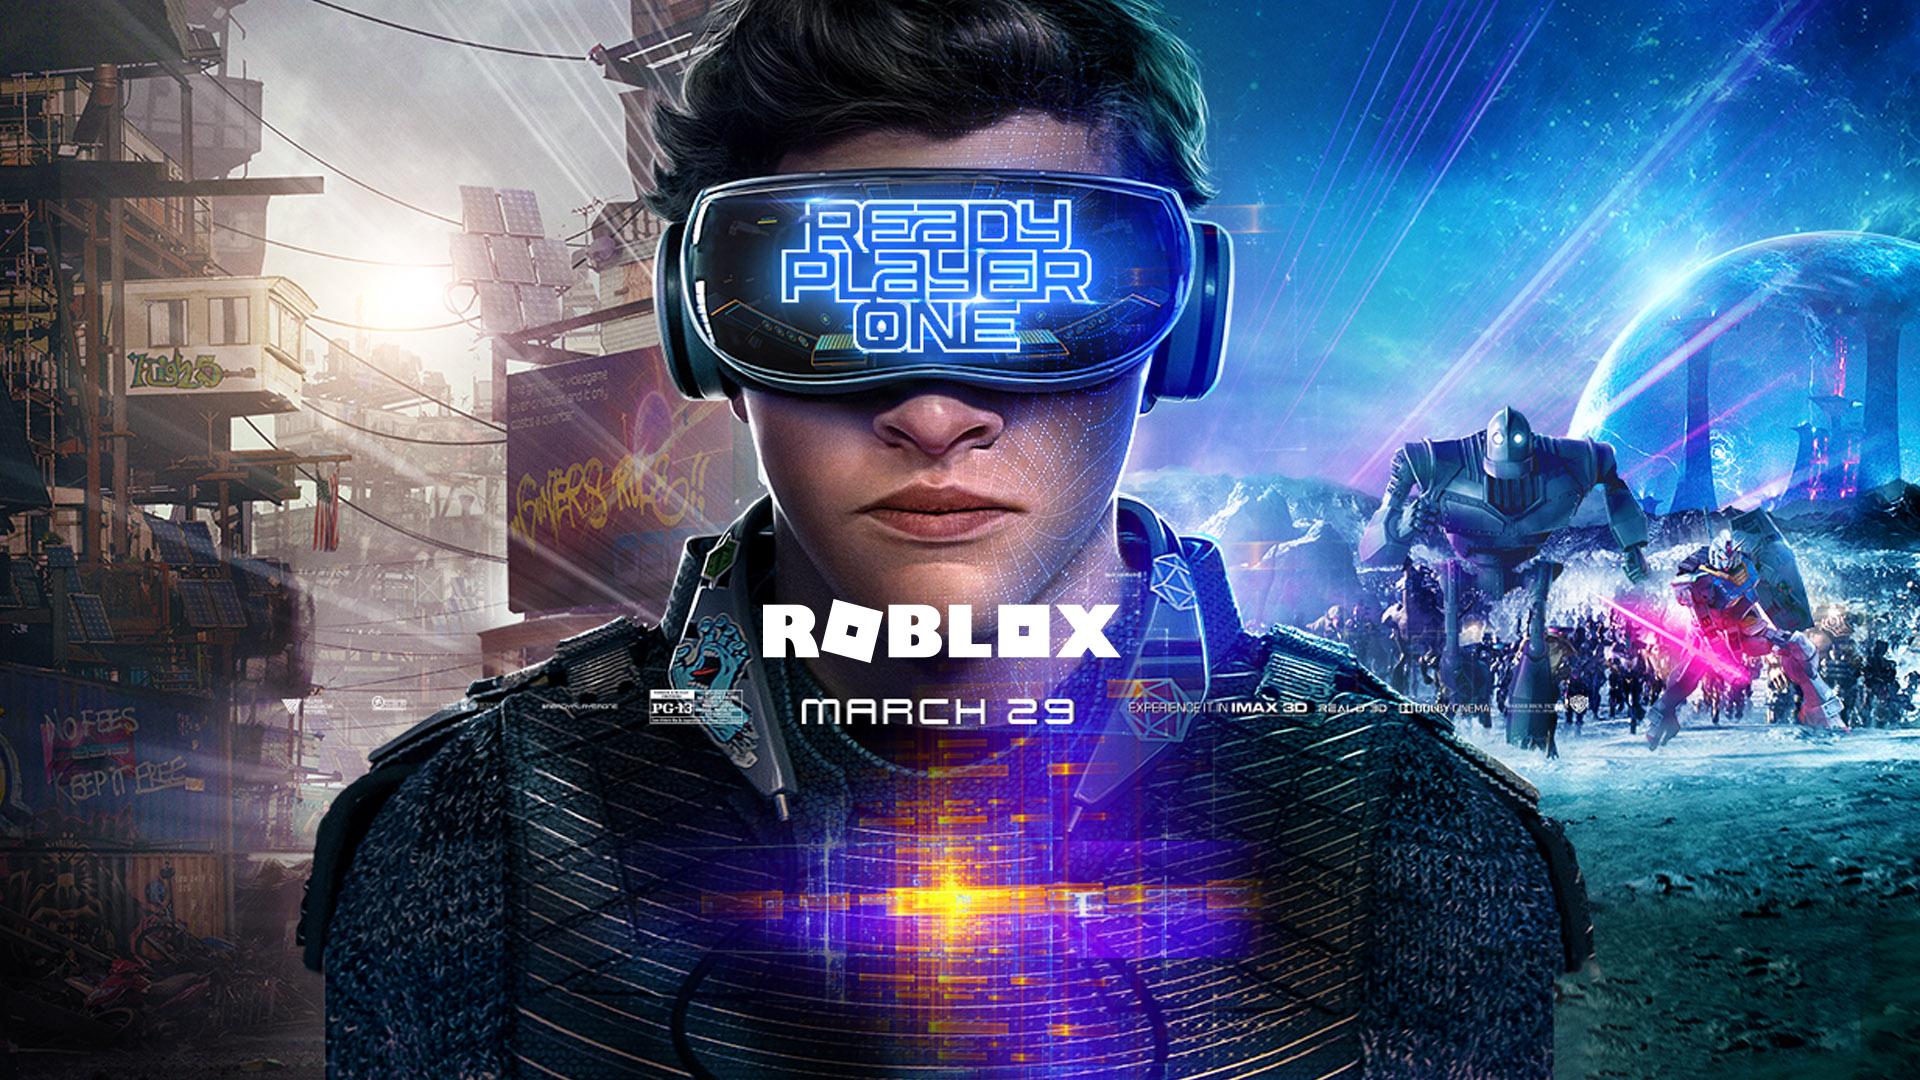 Roblox: Ready Player One Adventure Clues Blog